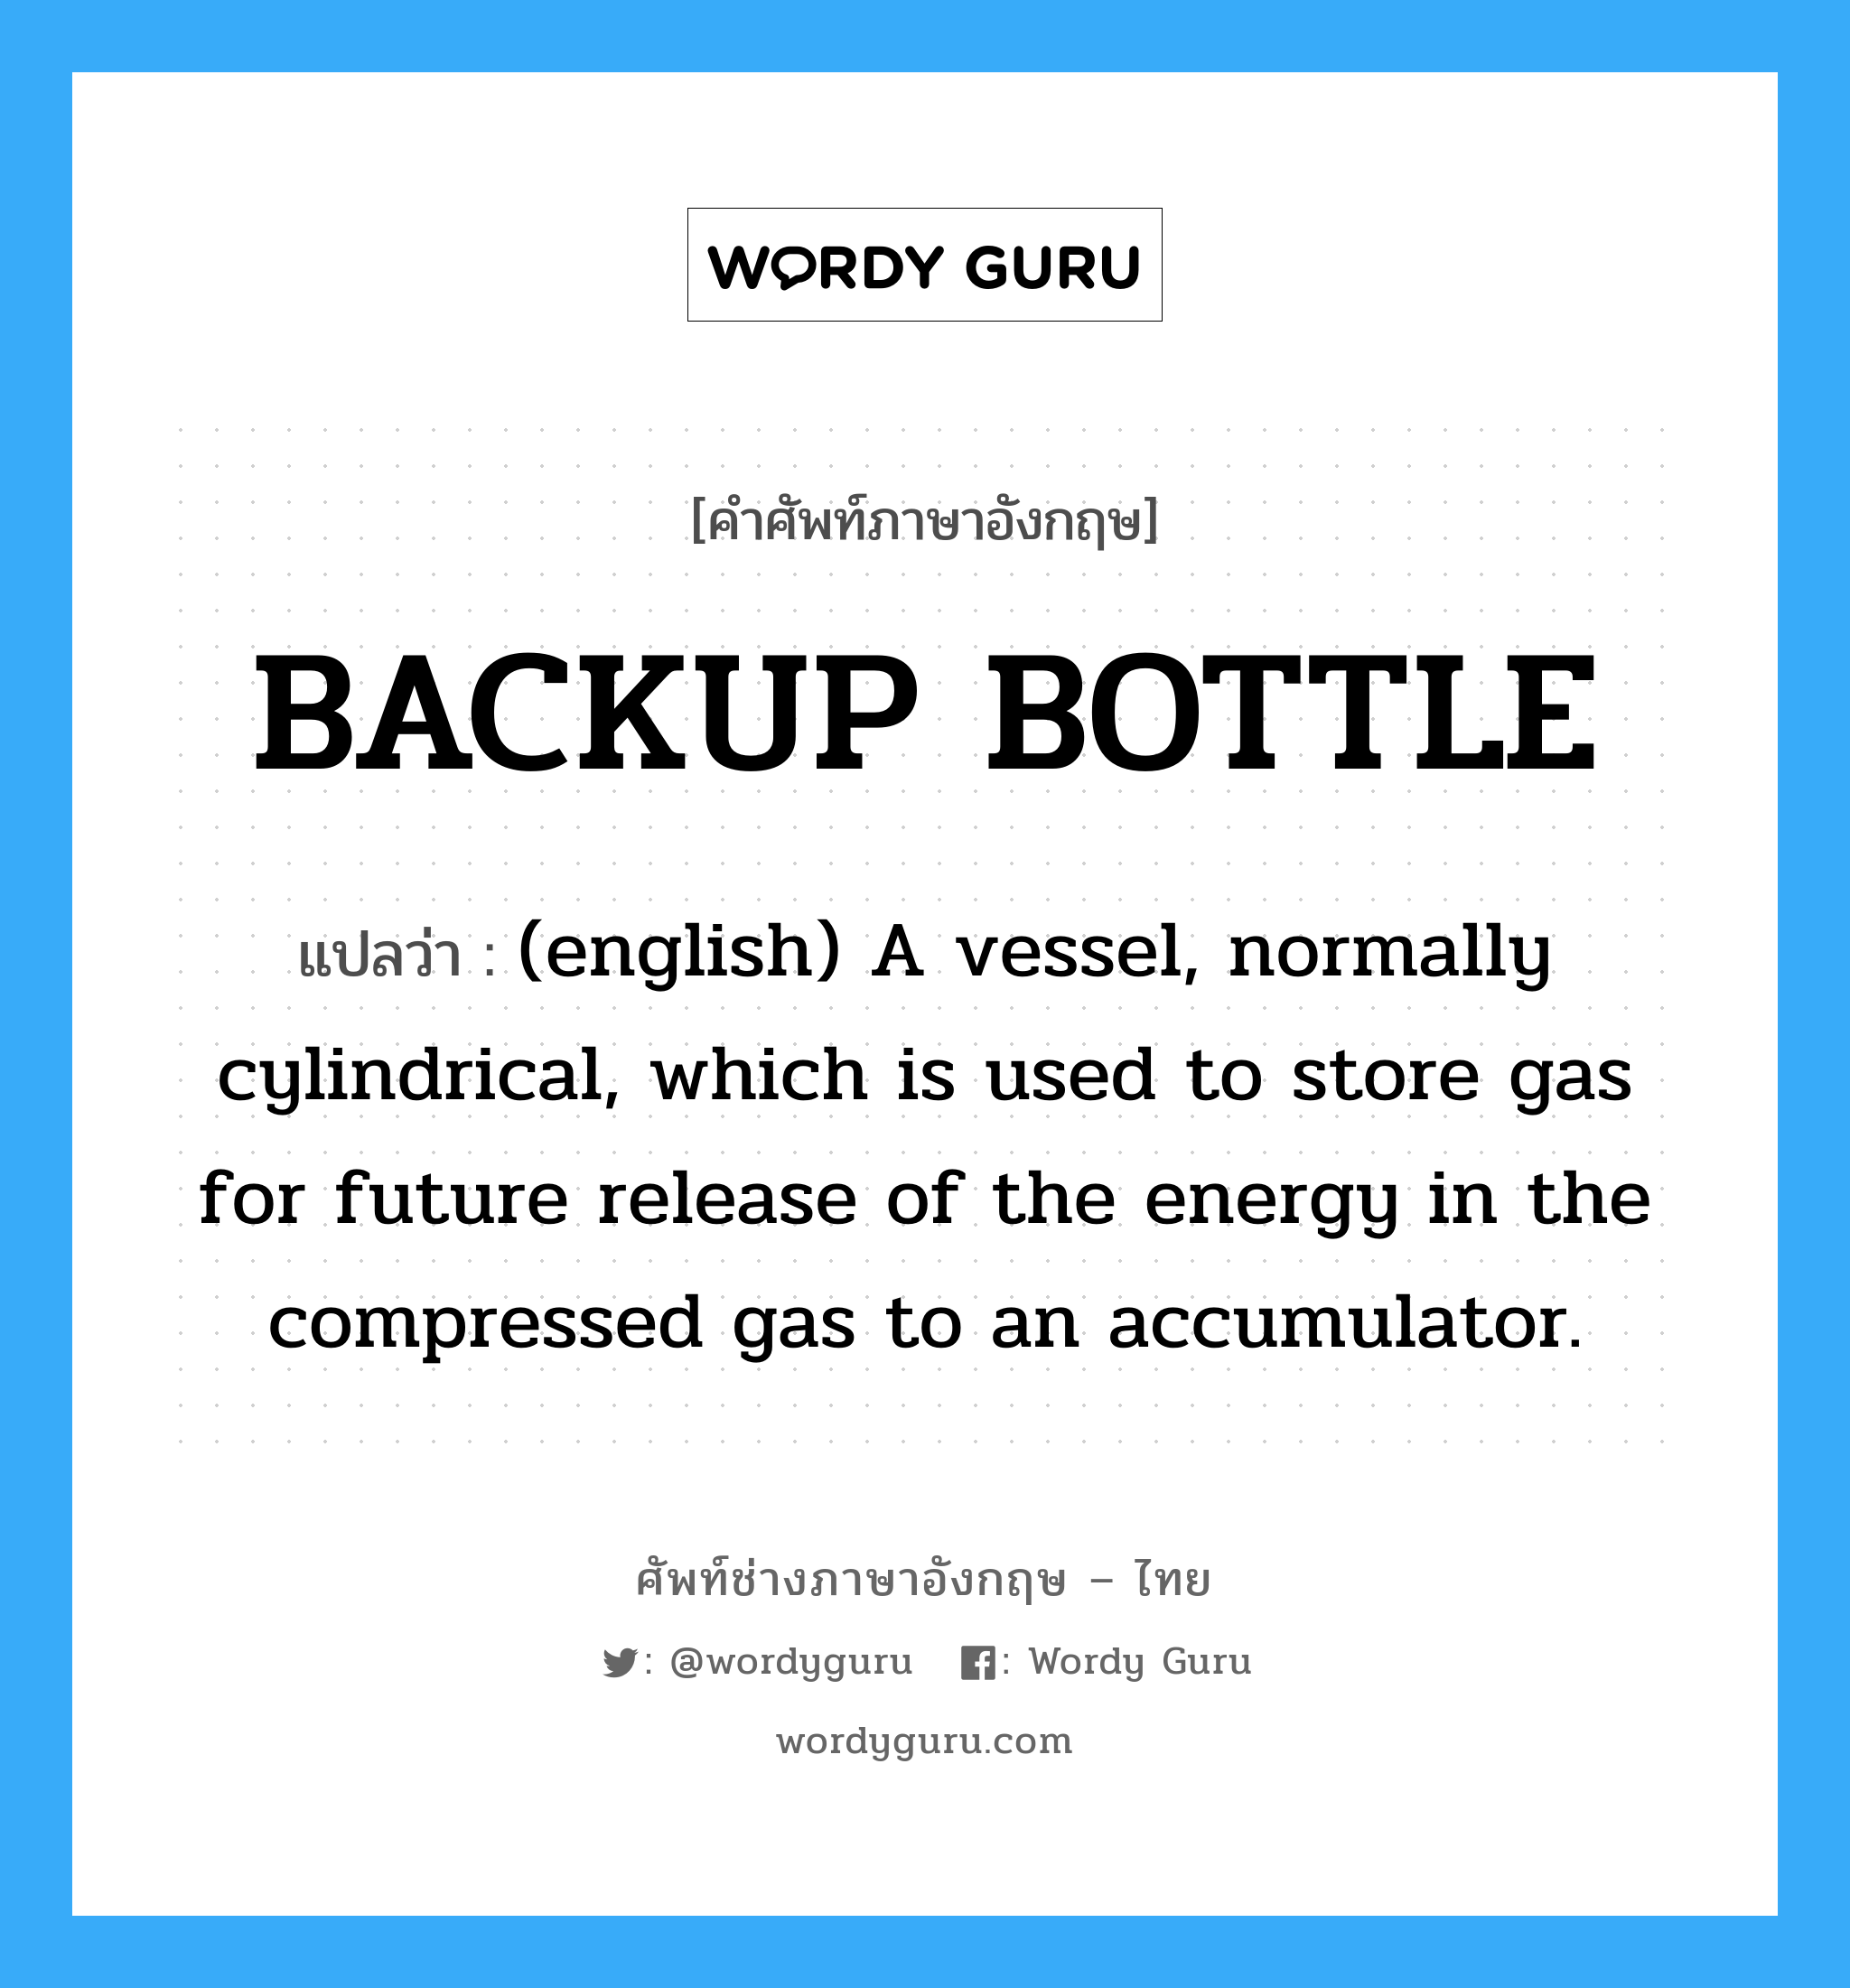 (english) A vessel, normally cylindrical, which is used to store fluid and gas for future release of the energy in the compressed fluid and gas. Normally contains a diaphragm or piston between the fluid (liquid) and gas chambers. Fluid is normally introduced at one end and the gas at the opposite end. ภาษาอังกฤษ?, คำศัพท์ช่างภาษาอังกฤษ - ไทย (english) A vessel, normally cylindrical, which is used to store gas for future release of the energy in the compressed gas to an accumulator. คำศัพท์ภาษาอังกฤษ (english) A vessel, normally cylindrical, which is used to store gas for future release of the energy in the compressed gas to an accumulator. แปลว่า BACKUP BOTTLE